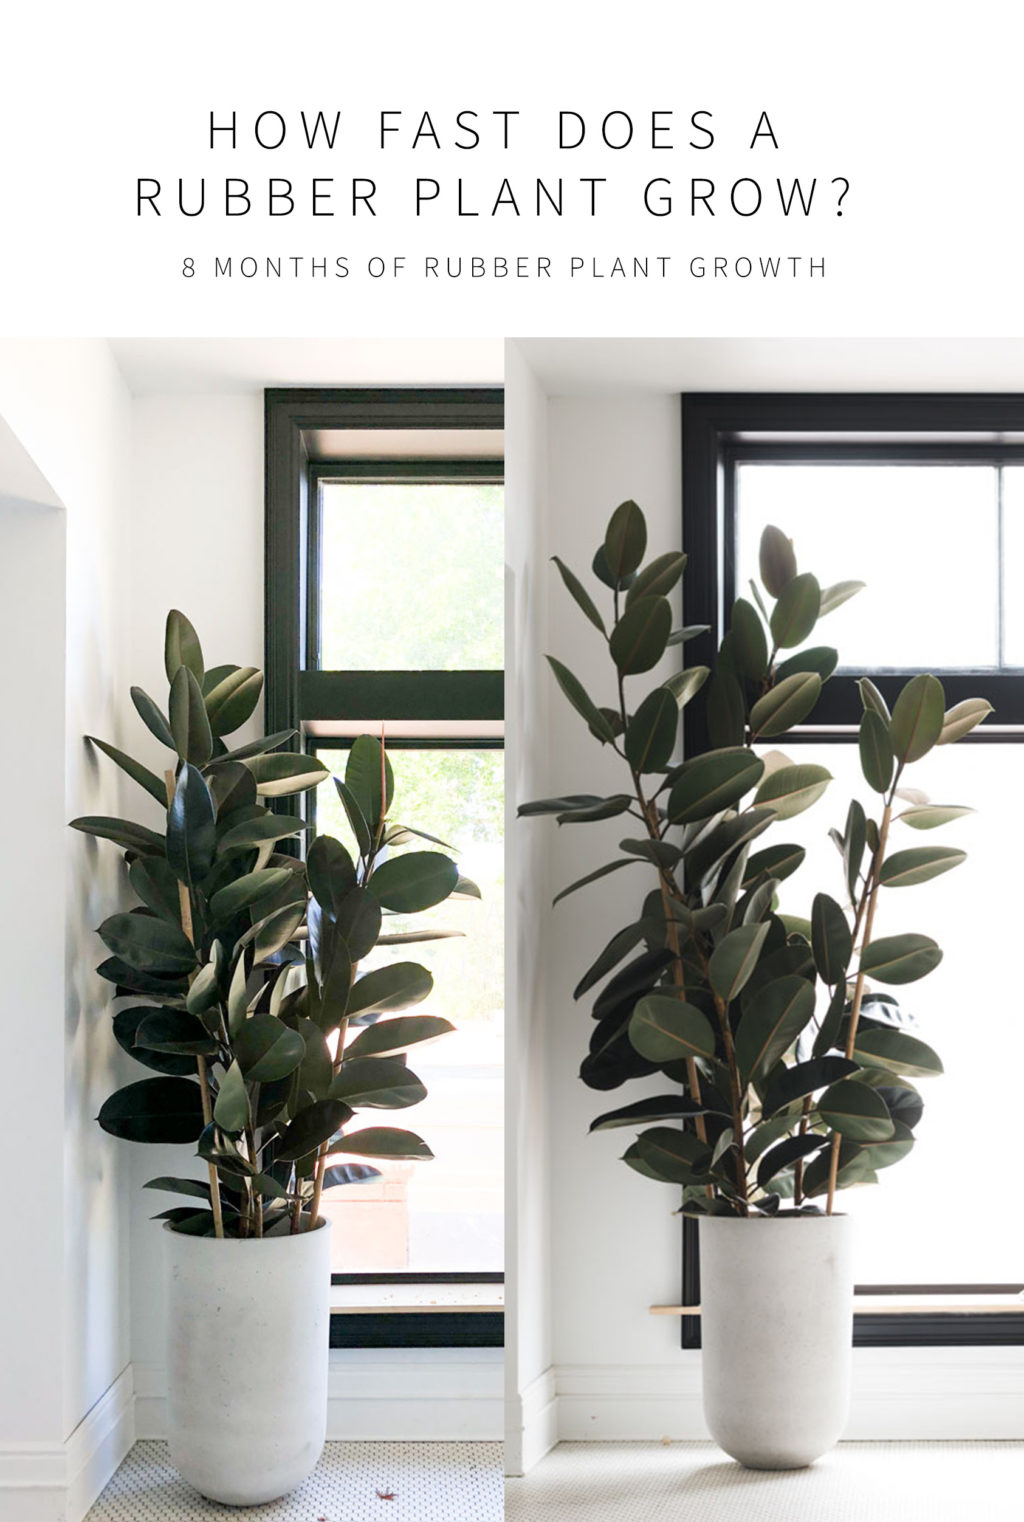 Side by side comparison of rubber plant growth over an 8 month period of time